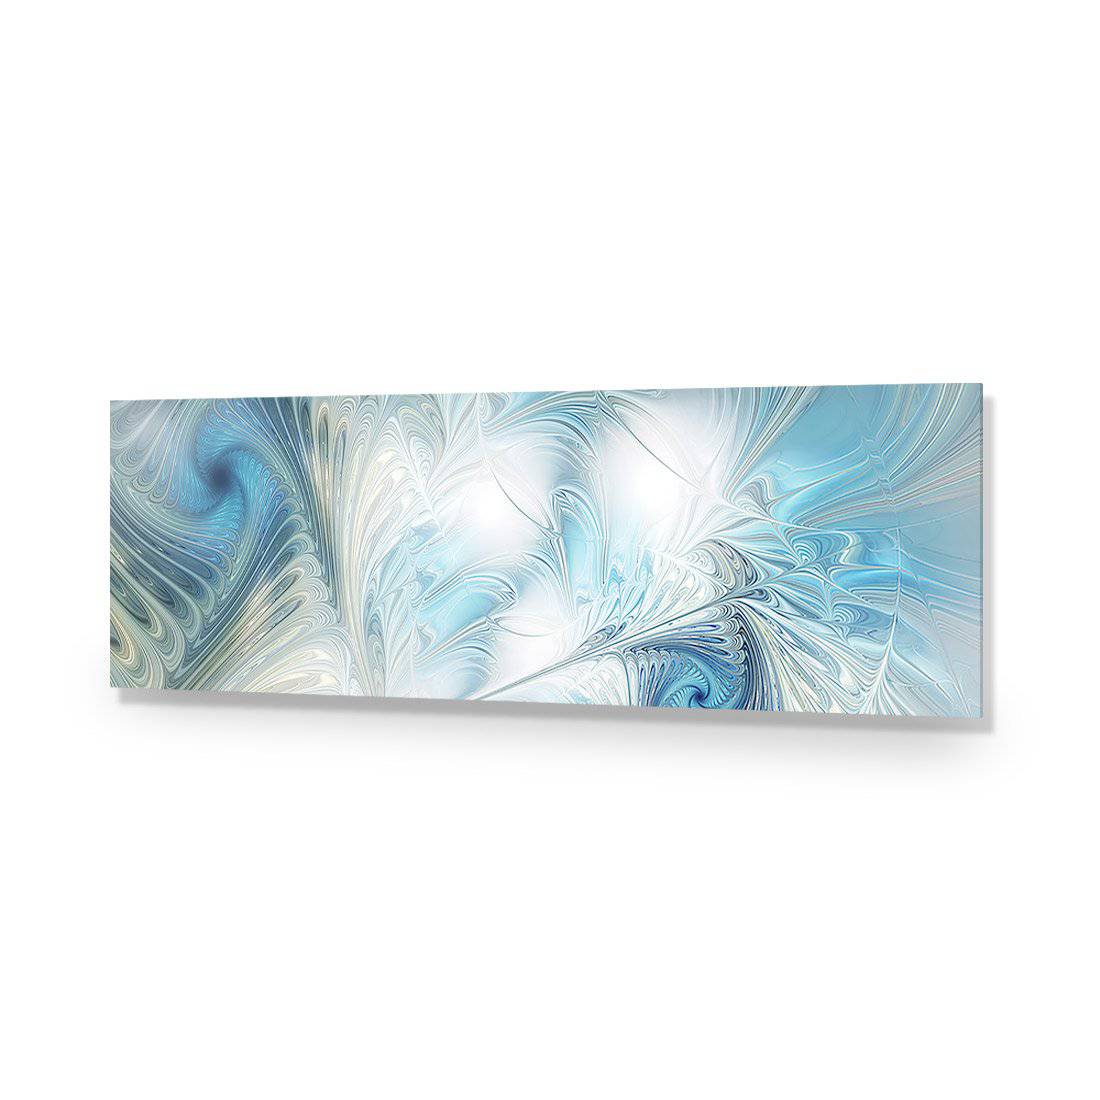 Travesty, Long-Acrylic-Wall Art Design-Without Border-Acrylic - No Frame-60x20cm-Wall Art Designs